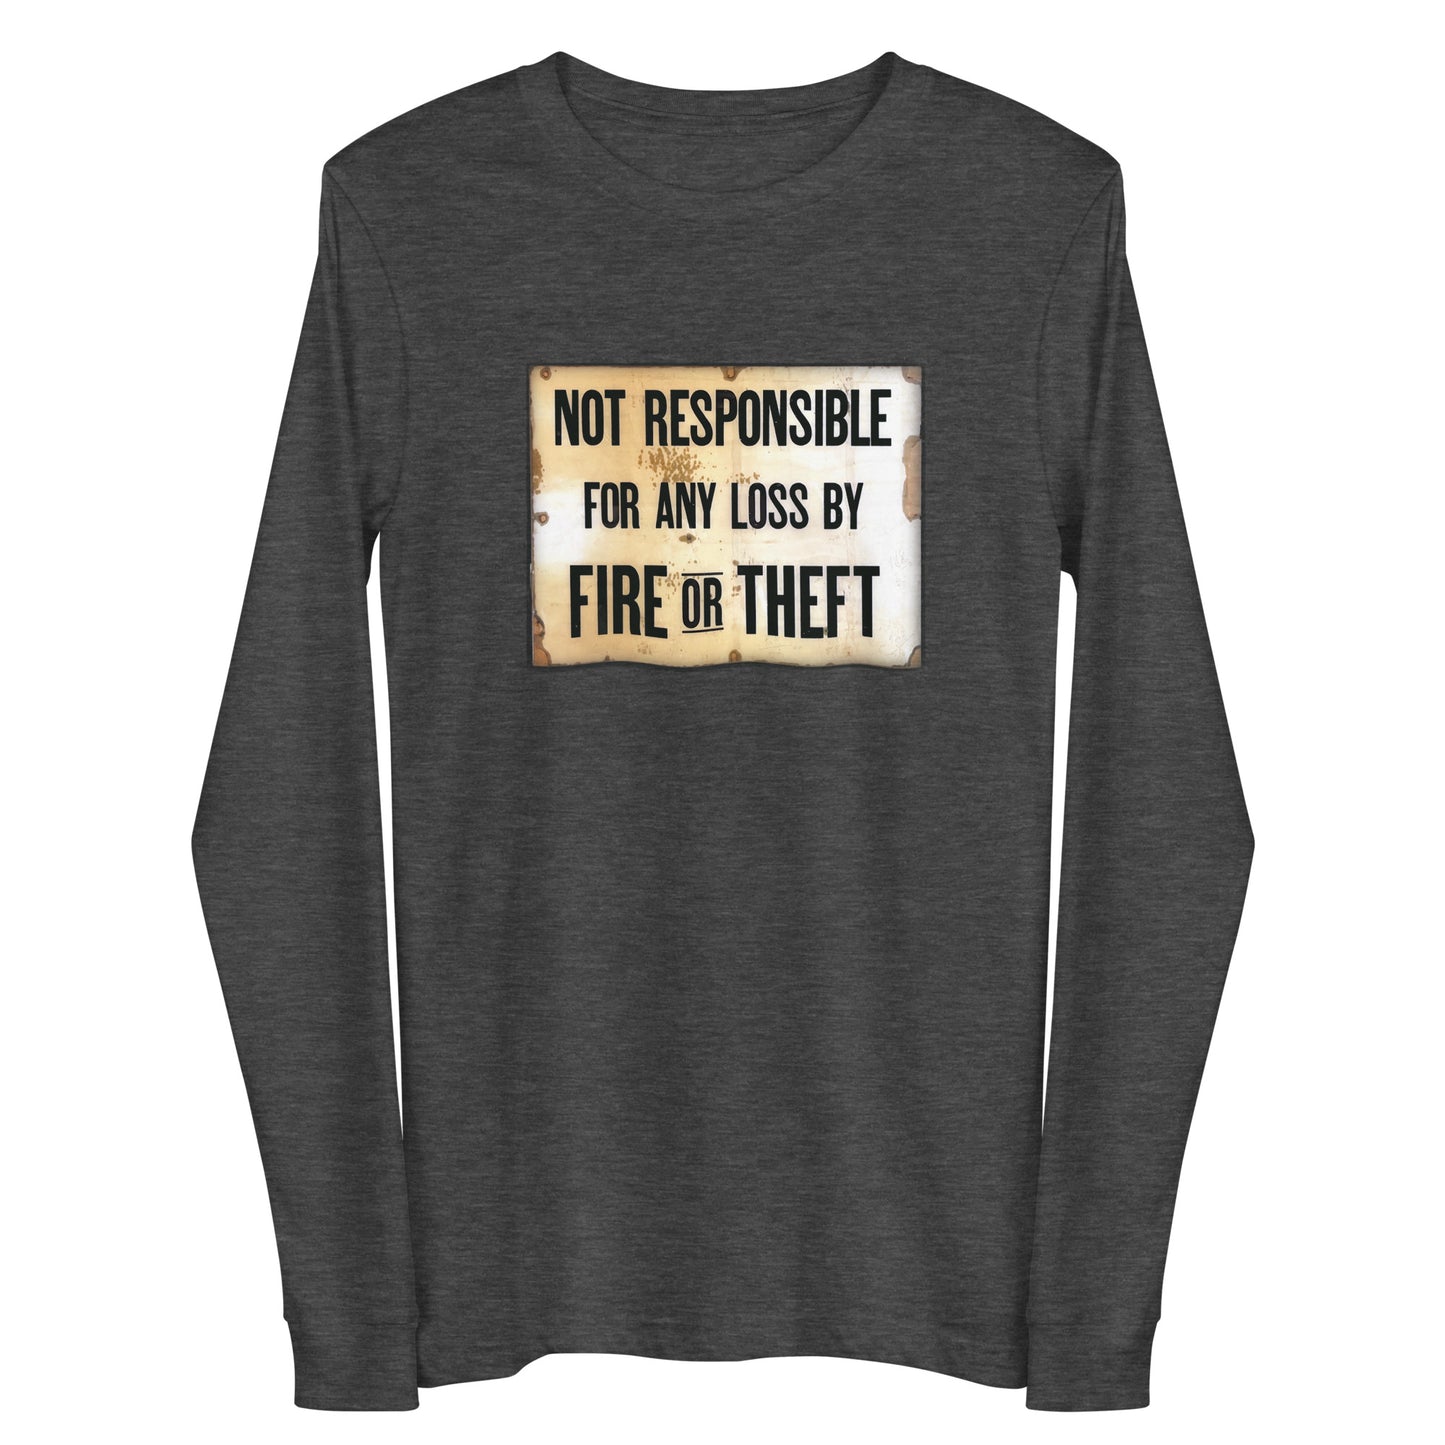 Not Responsible for Fire or Theft Long Sleeve Tee